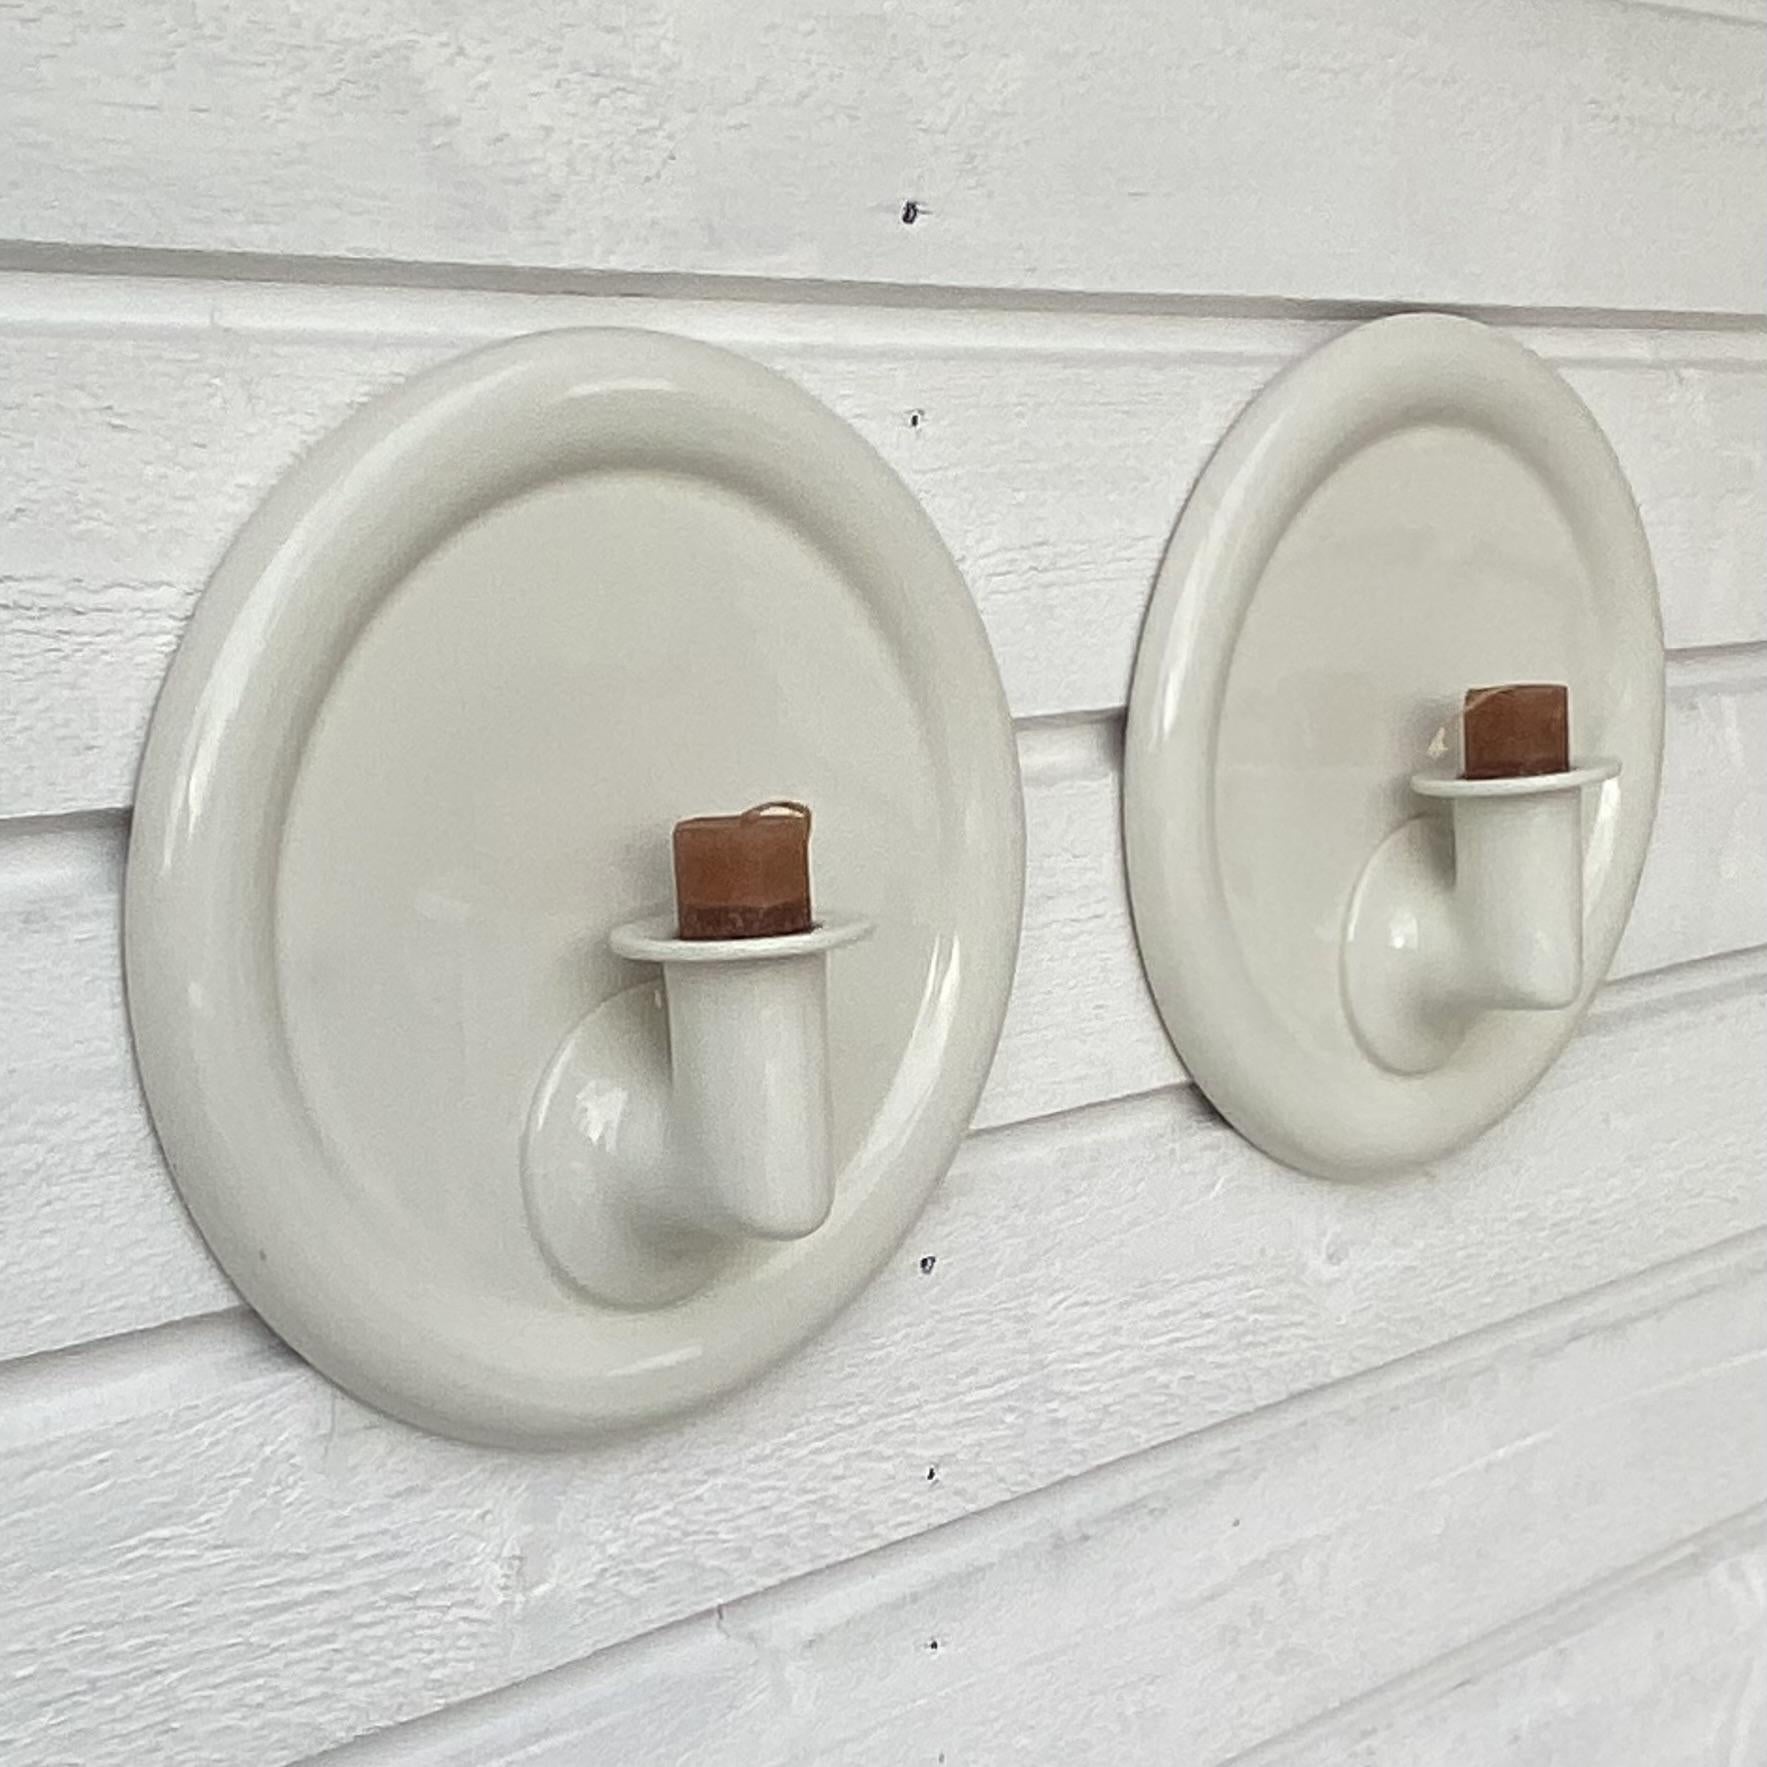 A pair of stoneware wall sconces designed by the Swedish ceramic artist Margareta Hennix for the Gustavsberg porcelain factory. These sconces boast a minimalistic design and provide a holder for a single pillar candle each. The artist Margareta